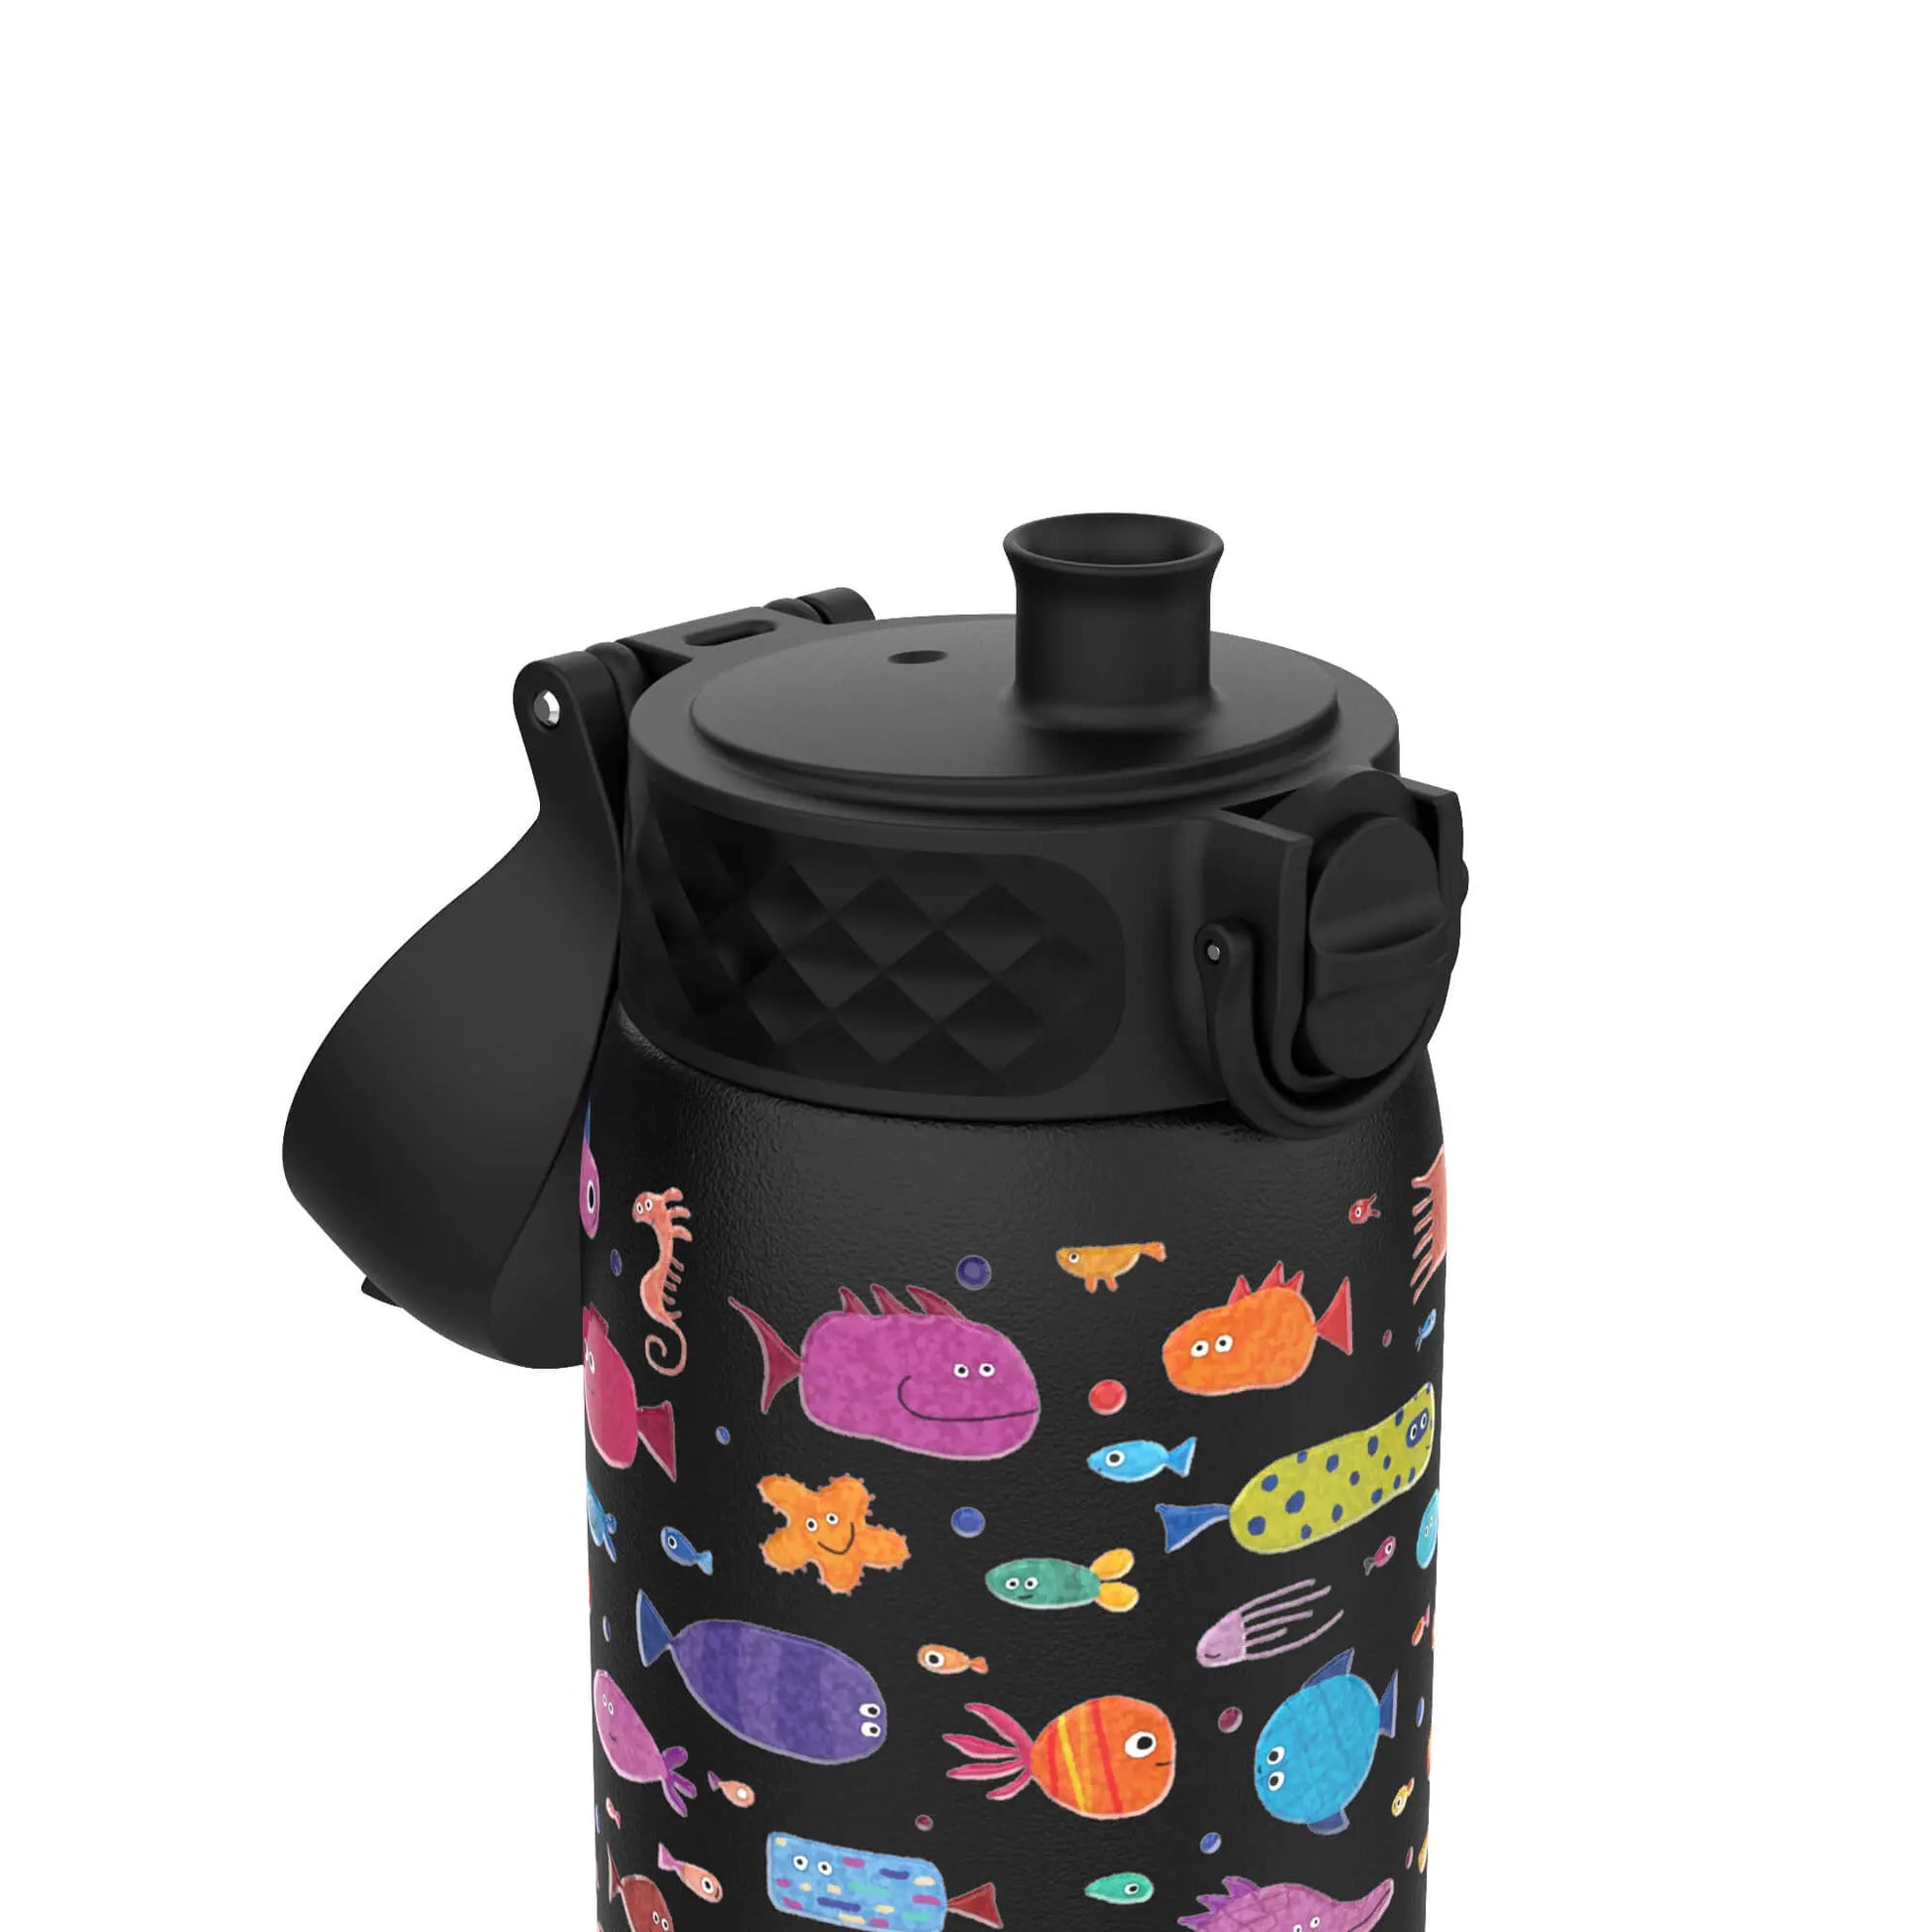 Leak Proof Thermal Steel Water Bottle, Vacuum Insulated, Fish, 320ml (11oz) Ion8